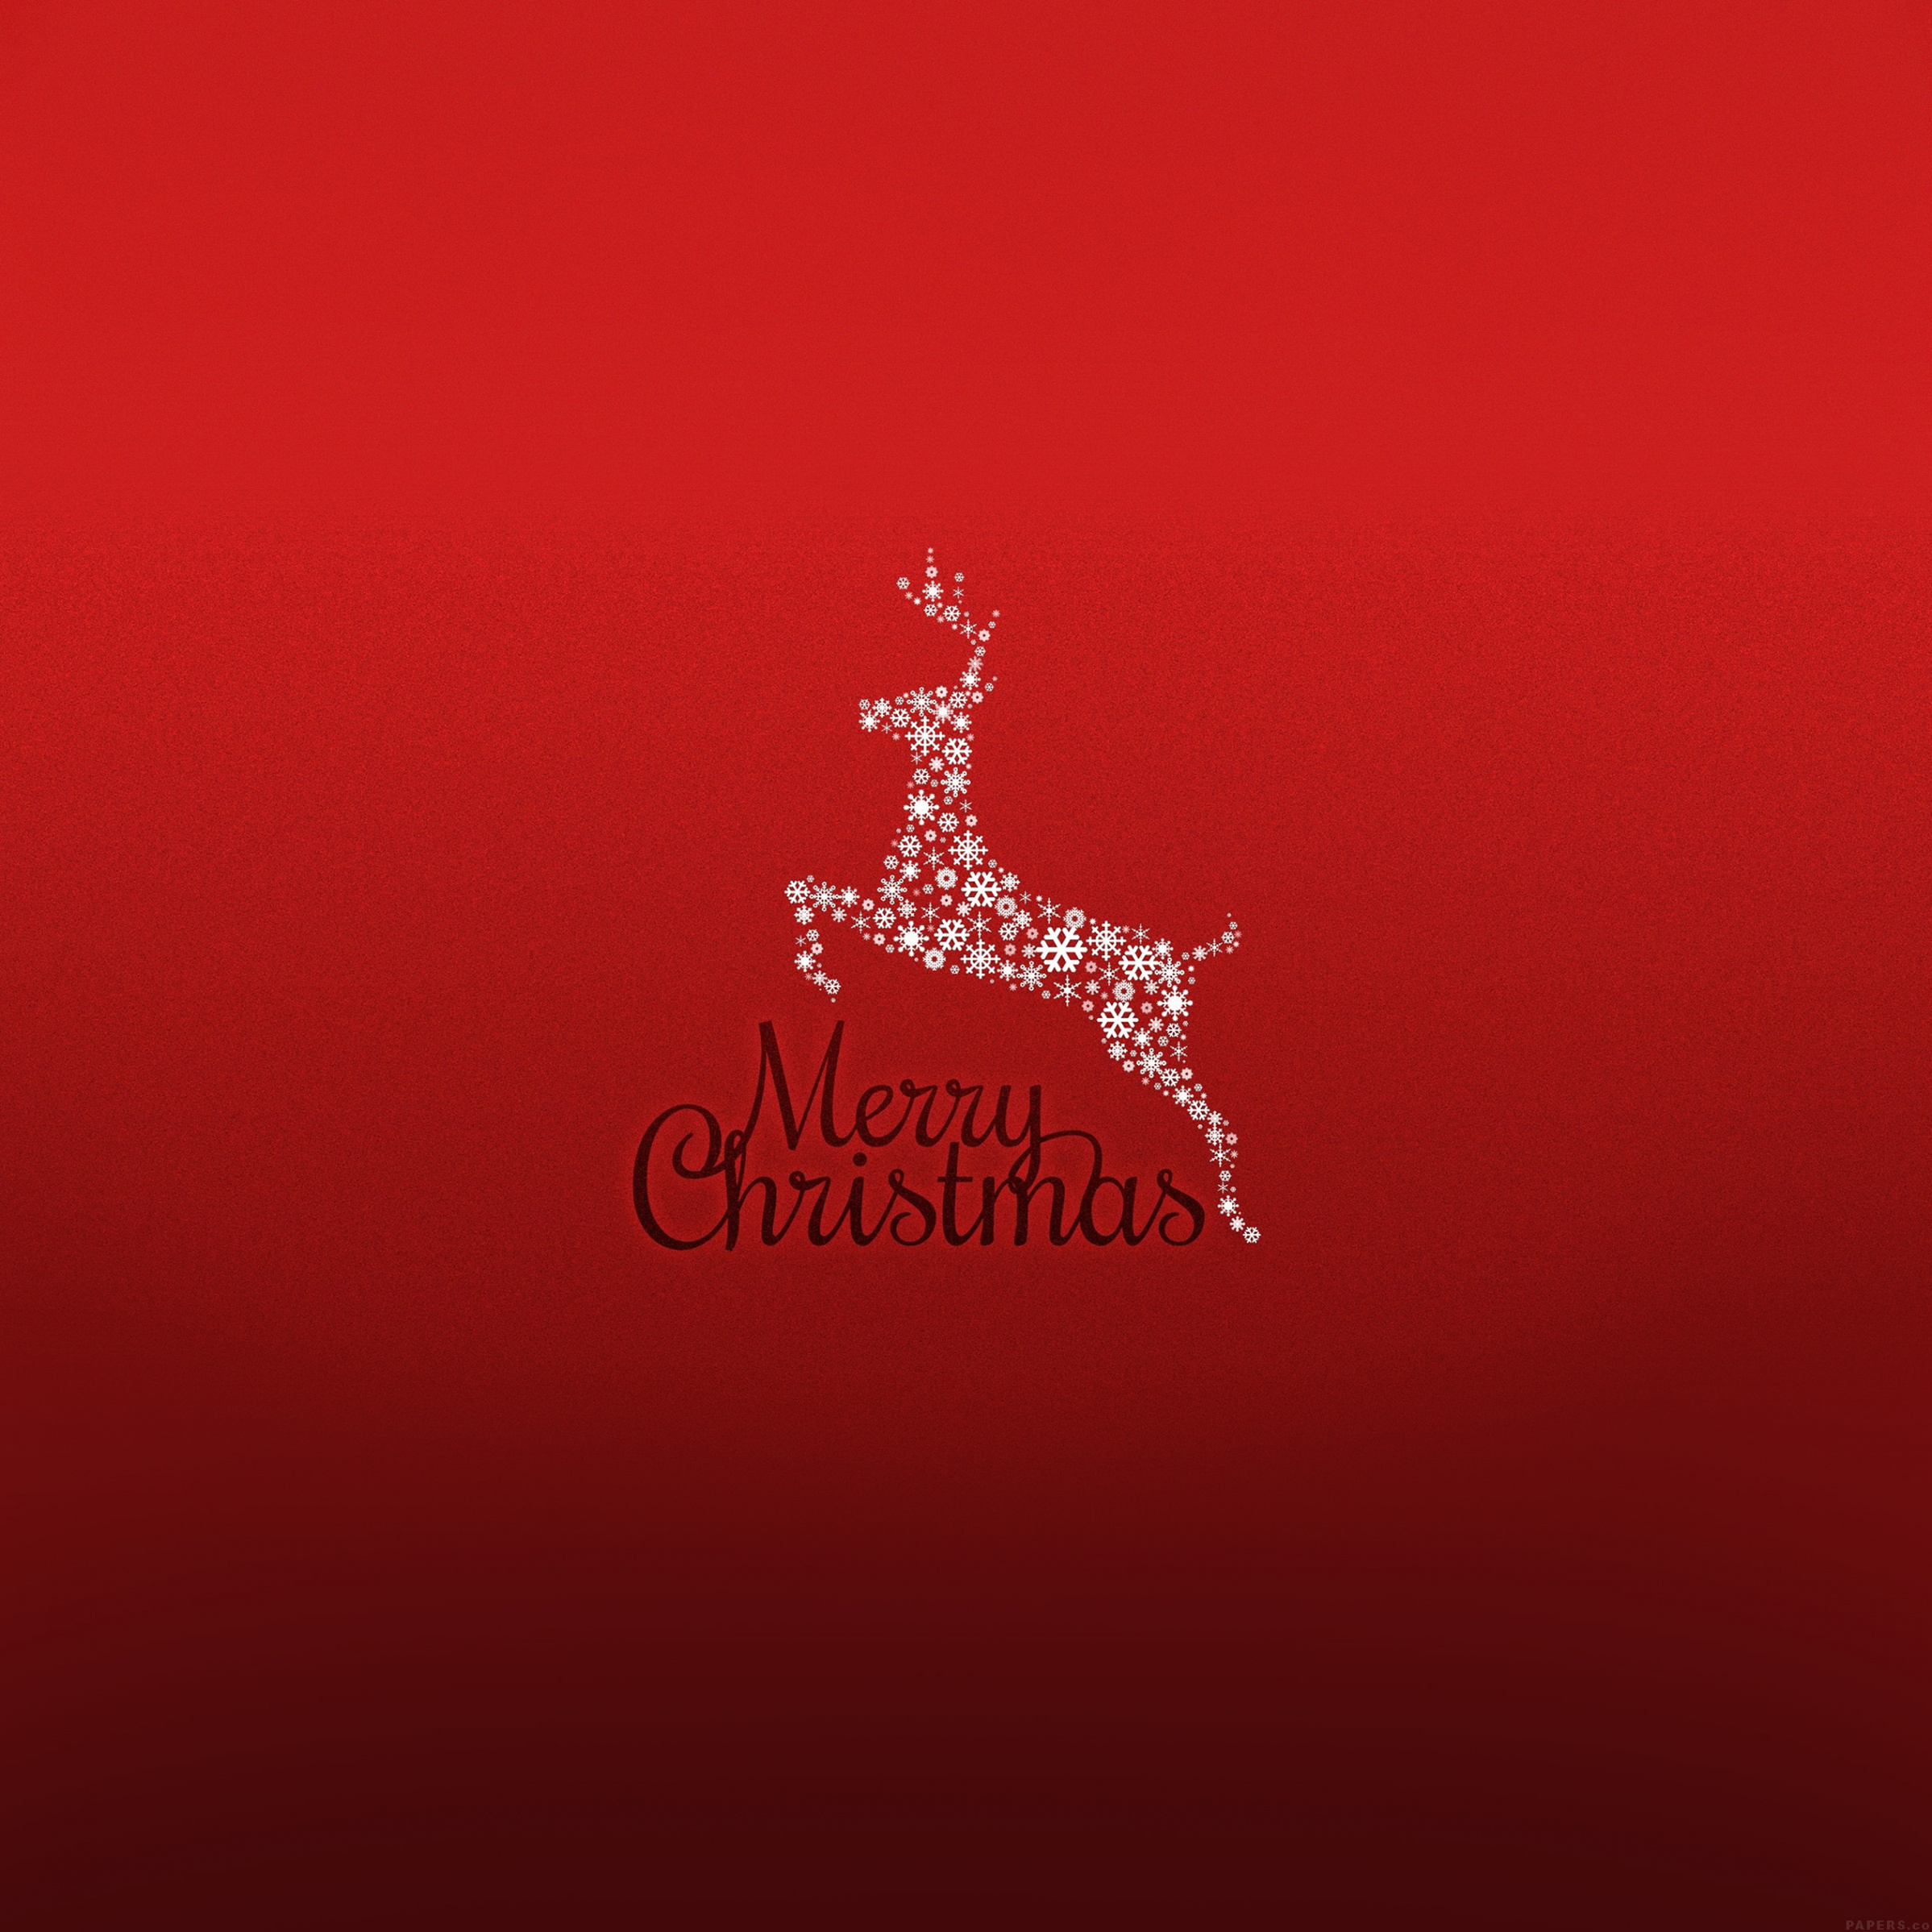 Festive Christmas wallpapers for iPhone and iPad